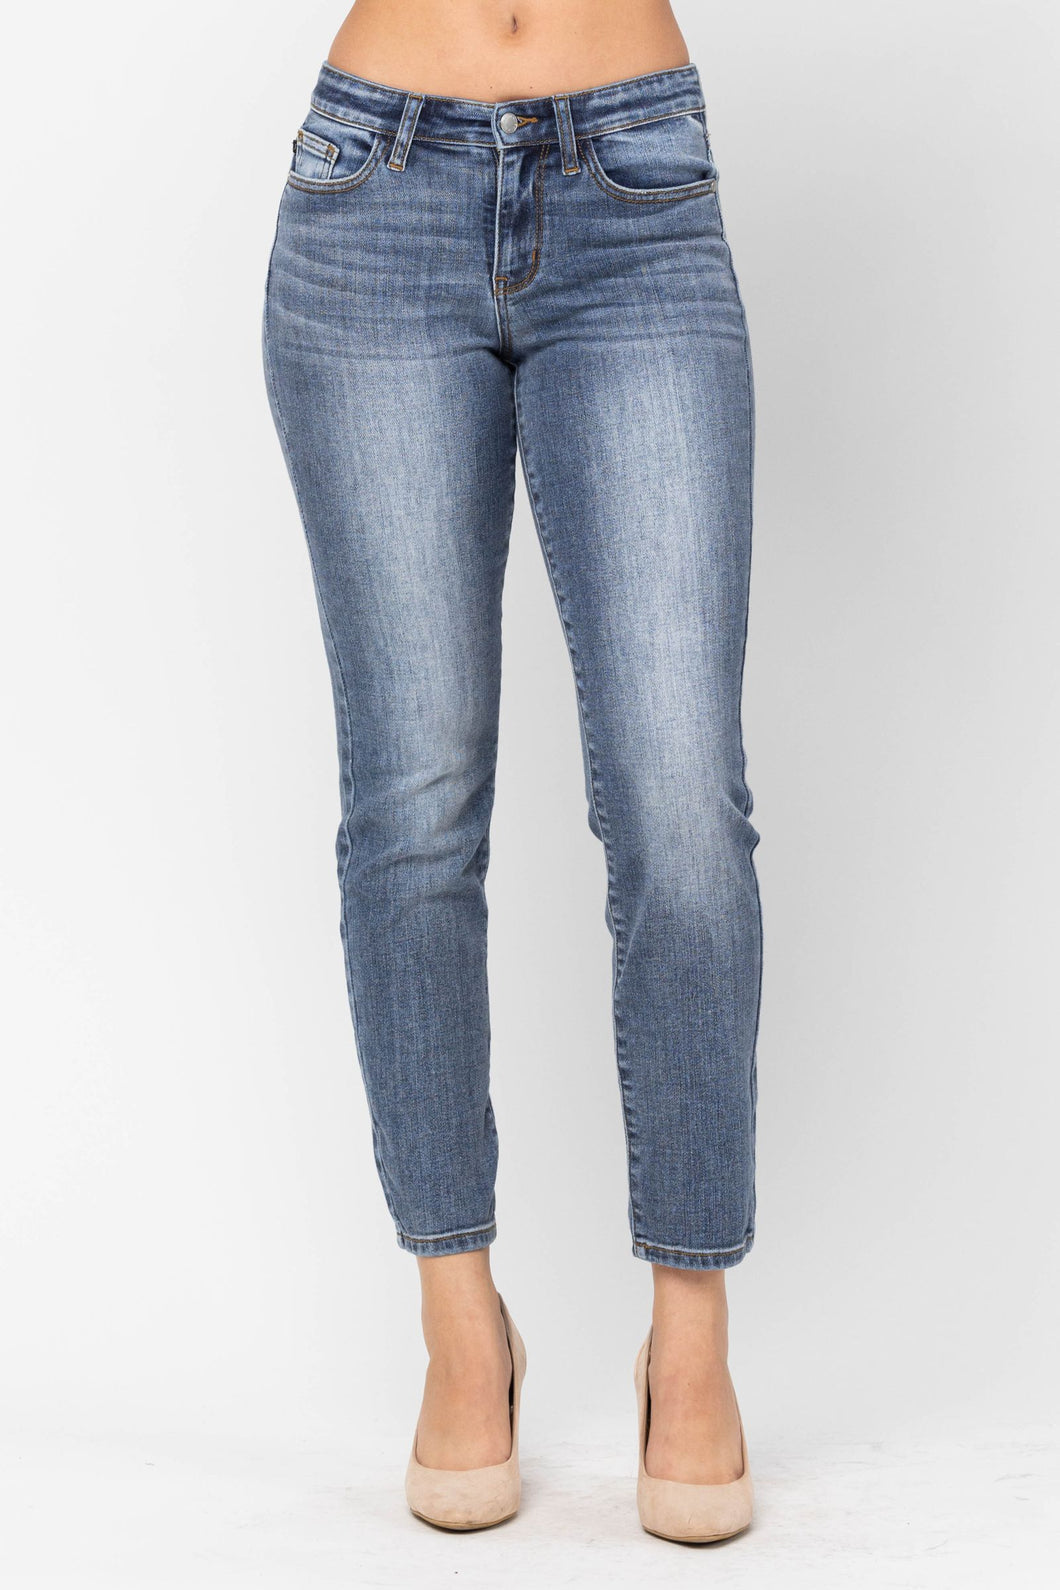 JUDY BLUE Mid Rise Classic Slim Fit Jeans